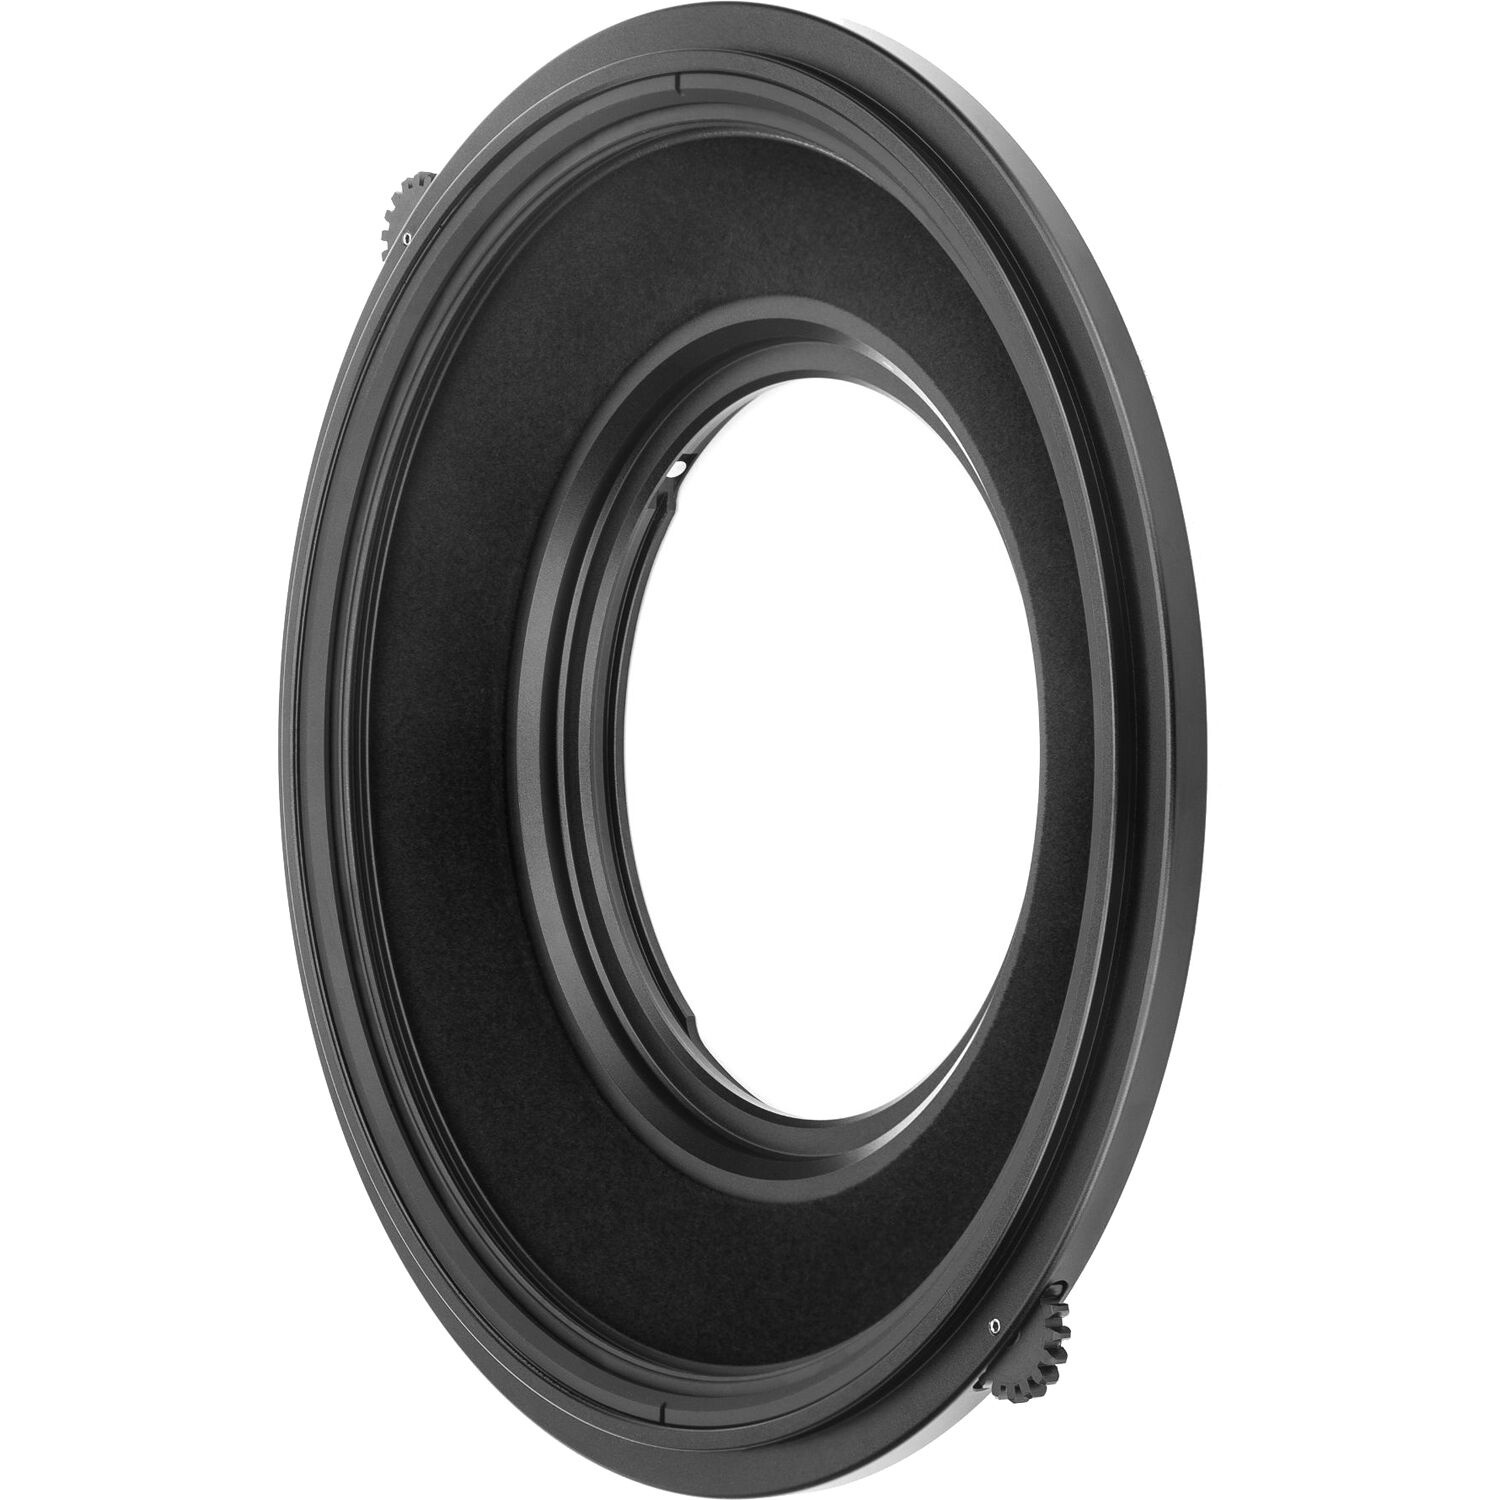 NiSi S6 150mm Filter Holder Adapter Ring for Nikon Z 14-24mm f/2.8 S